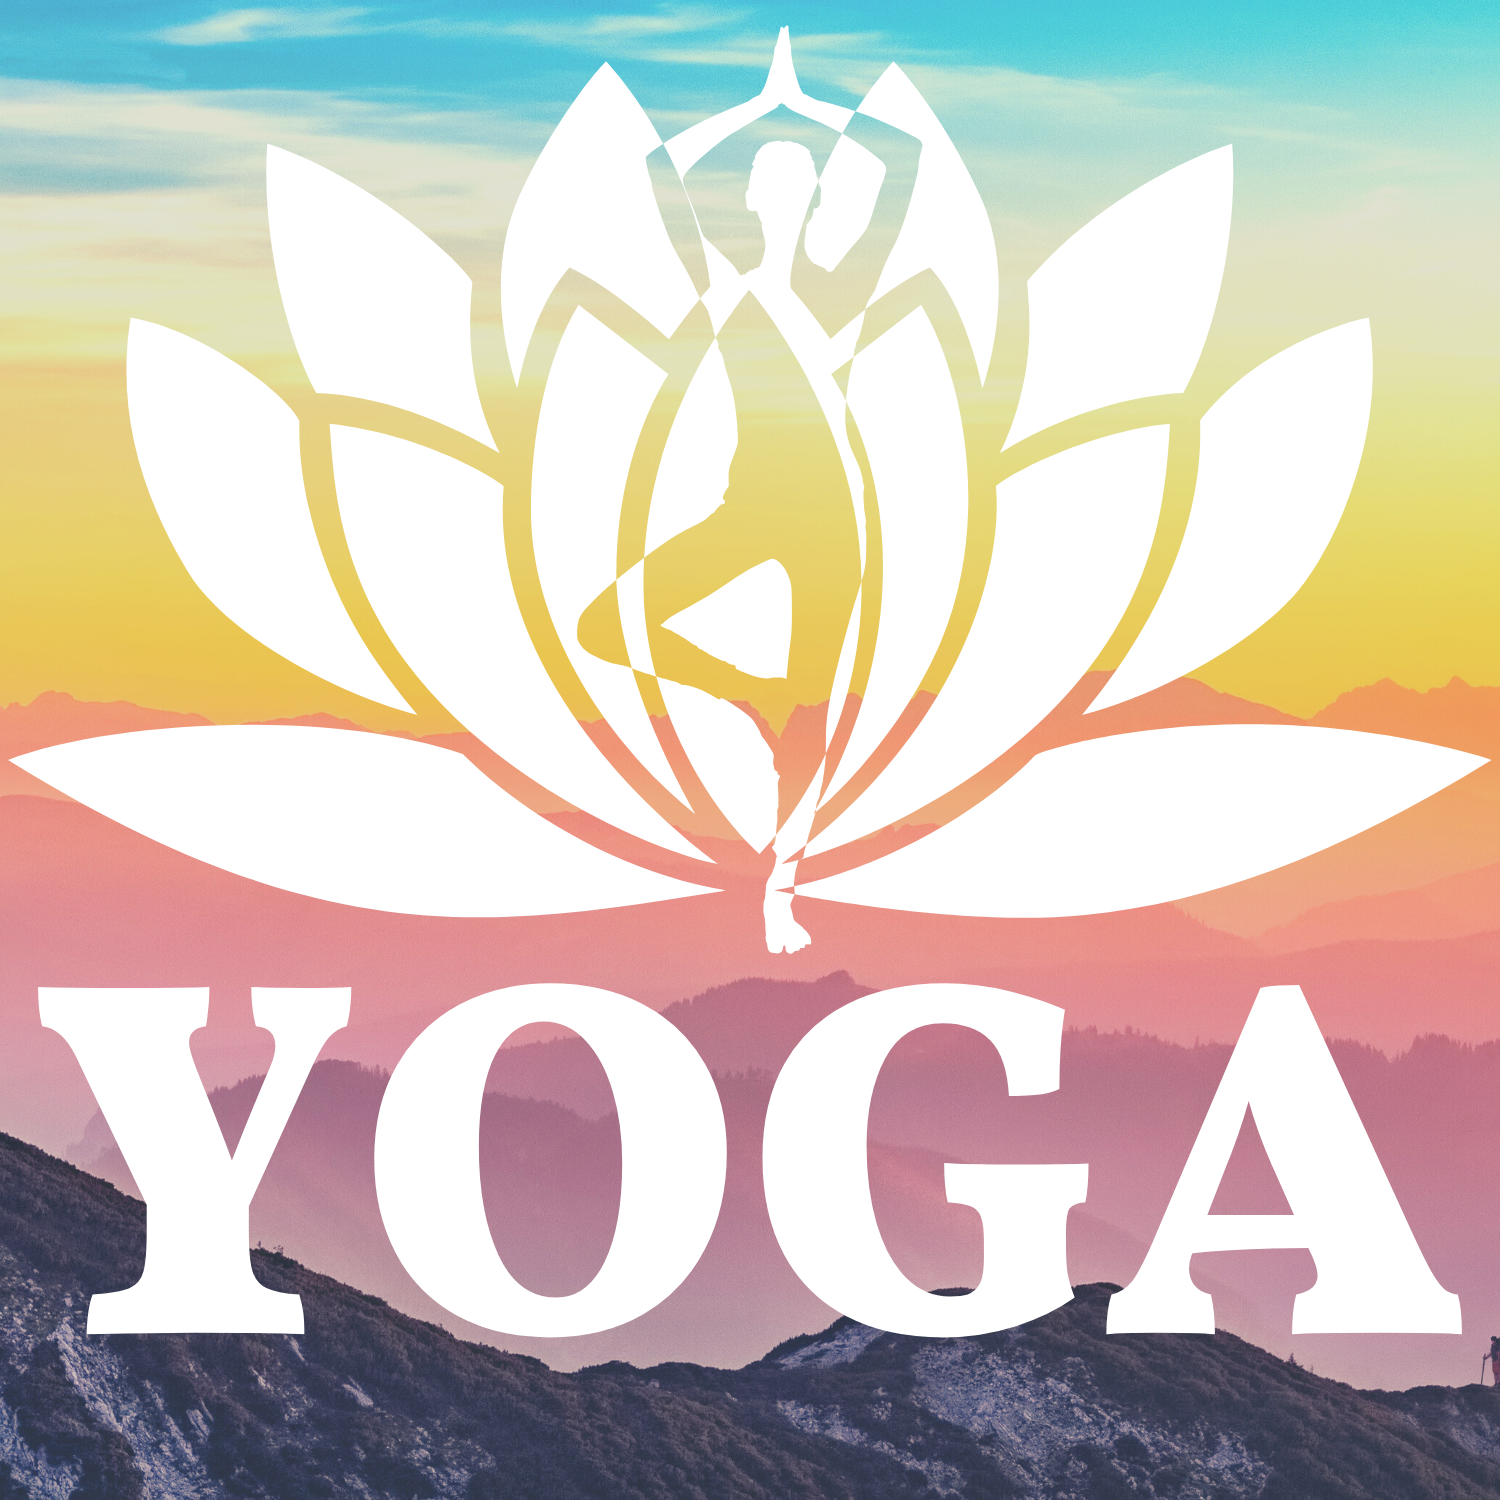 A YOGA experience project by Yaymaker